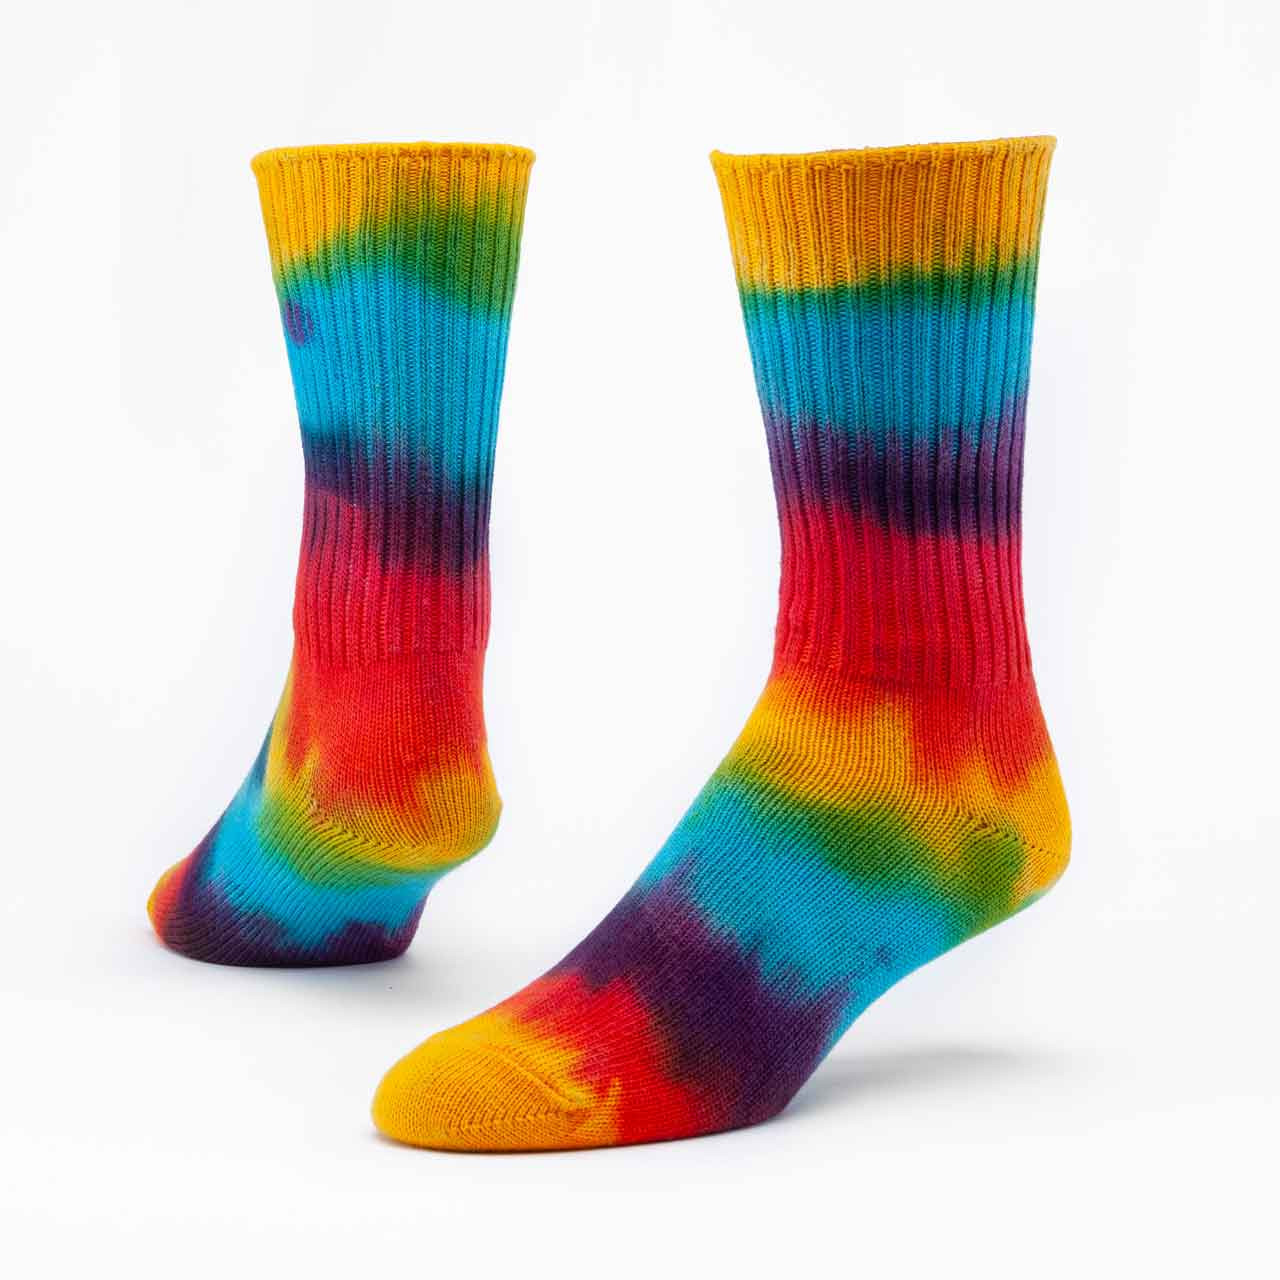 https://cdn11.bigcommerce.com/s-sr2gbw/images/stencil/1280w/products/98/10881/Foot-Forms-2020---Crew-Socks--Hand-Dyed-bold__01693.1699007302.jpg